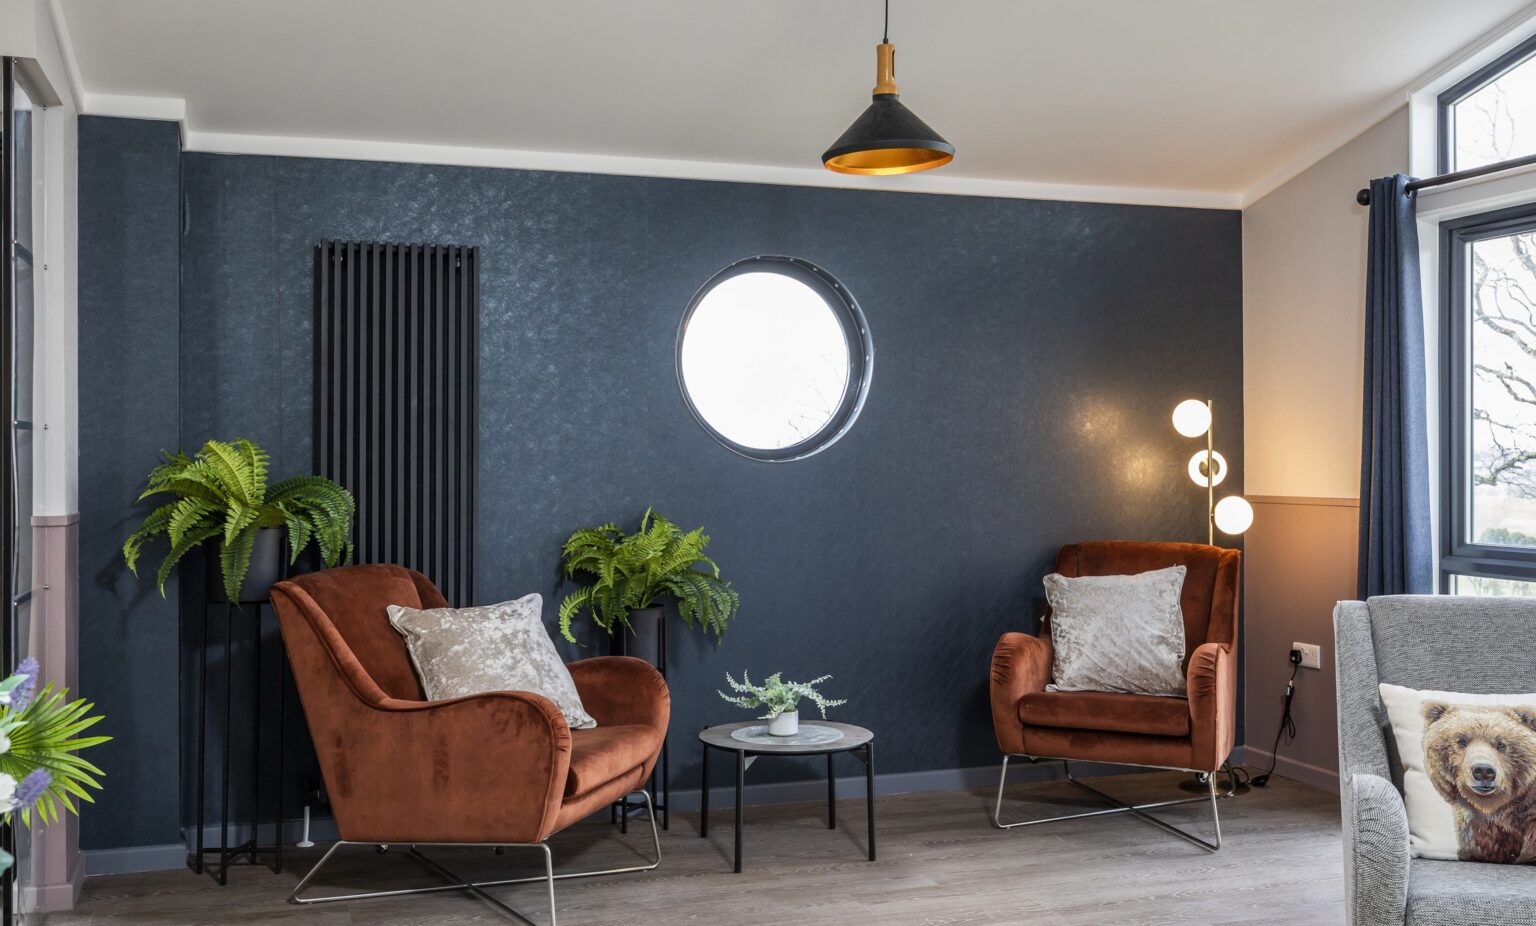 Two brown plush armchairs in front of a dark blue wall